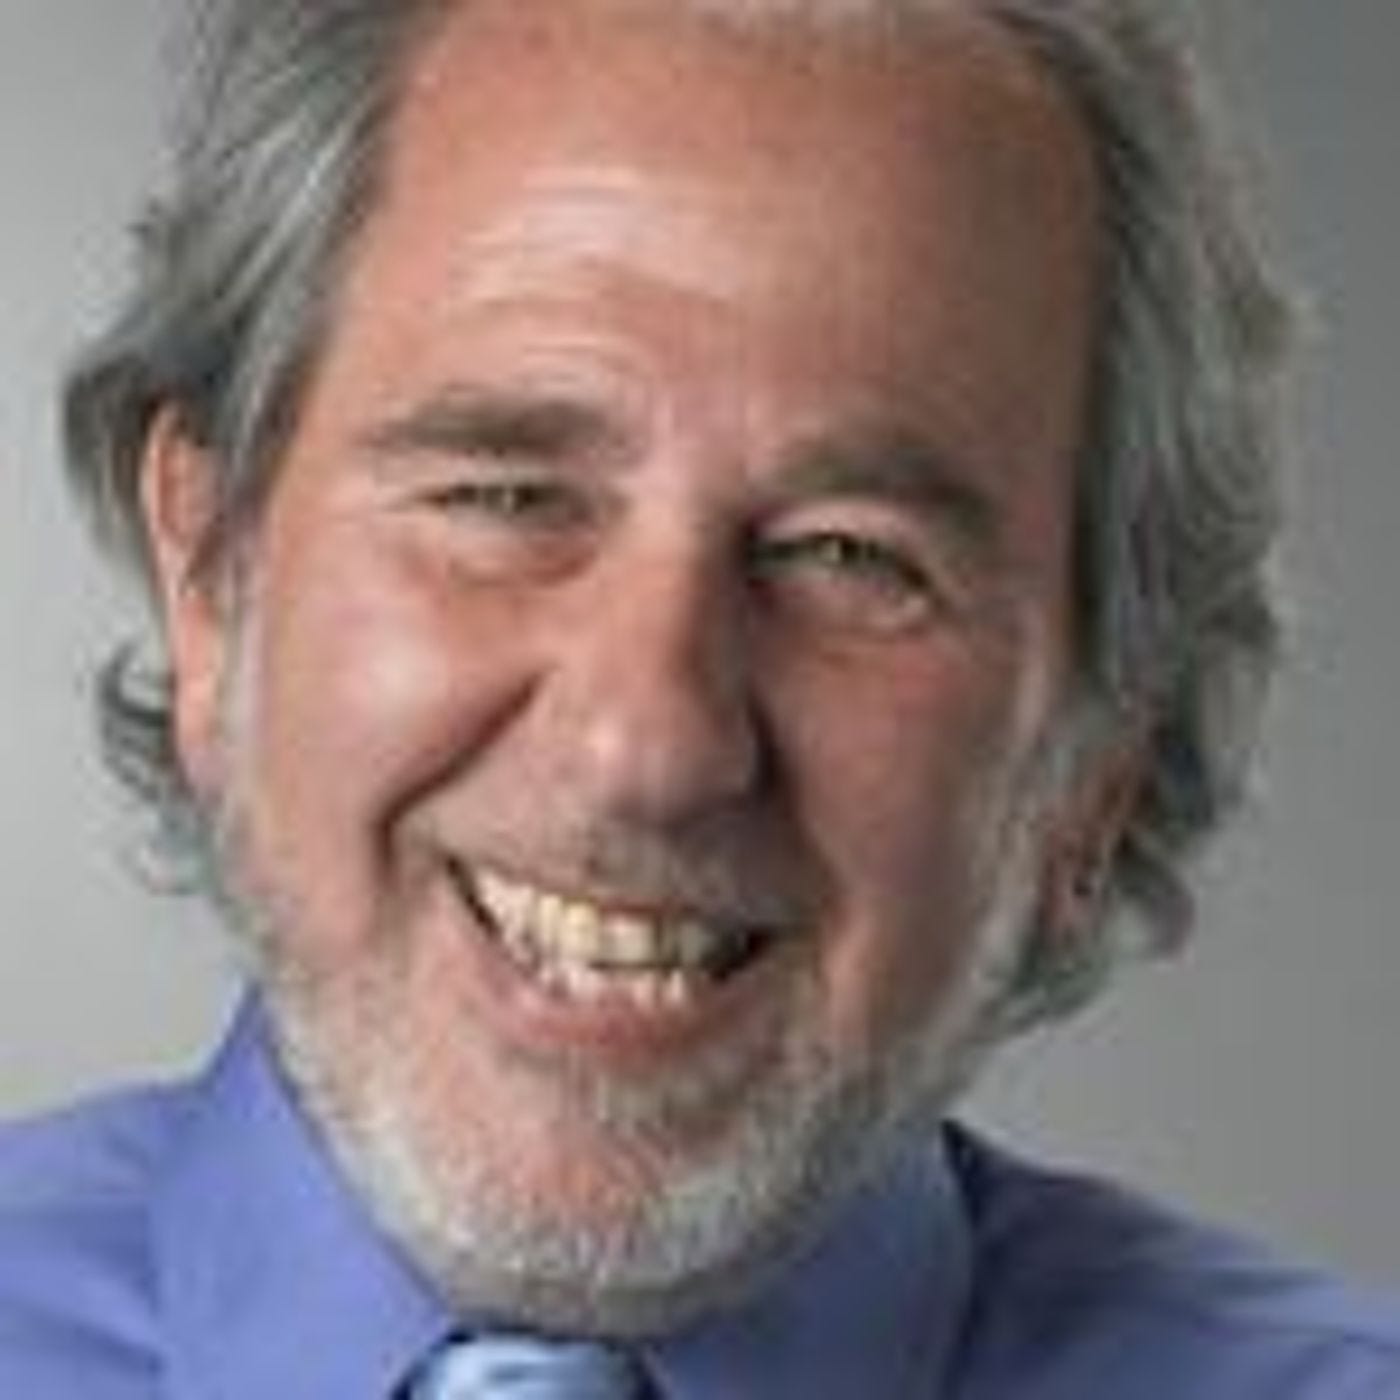 Dr. Bruce Lipton on *The Biology of Belief*